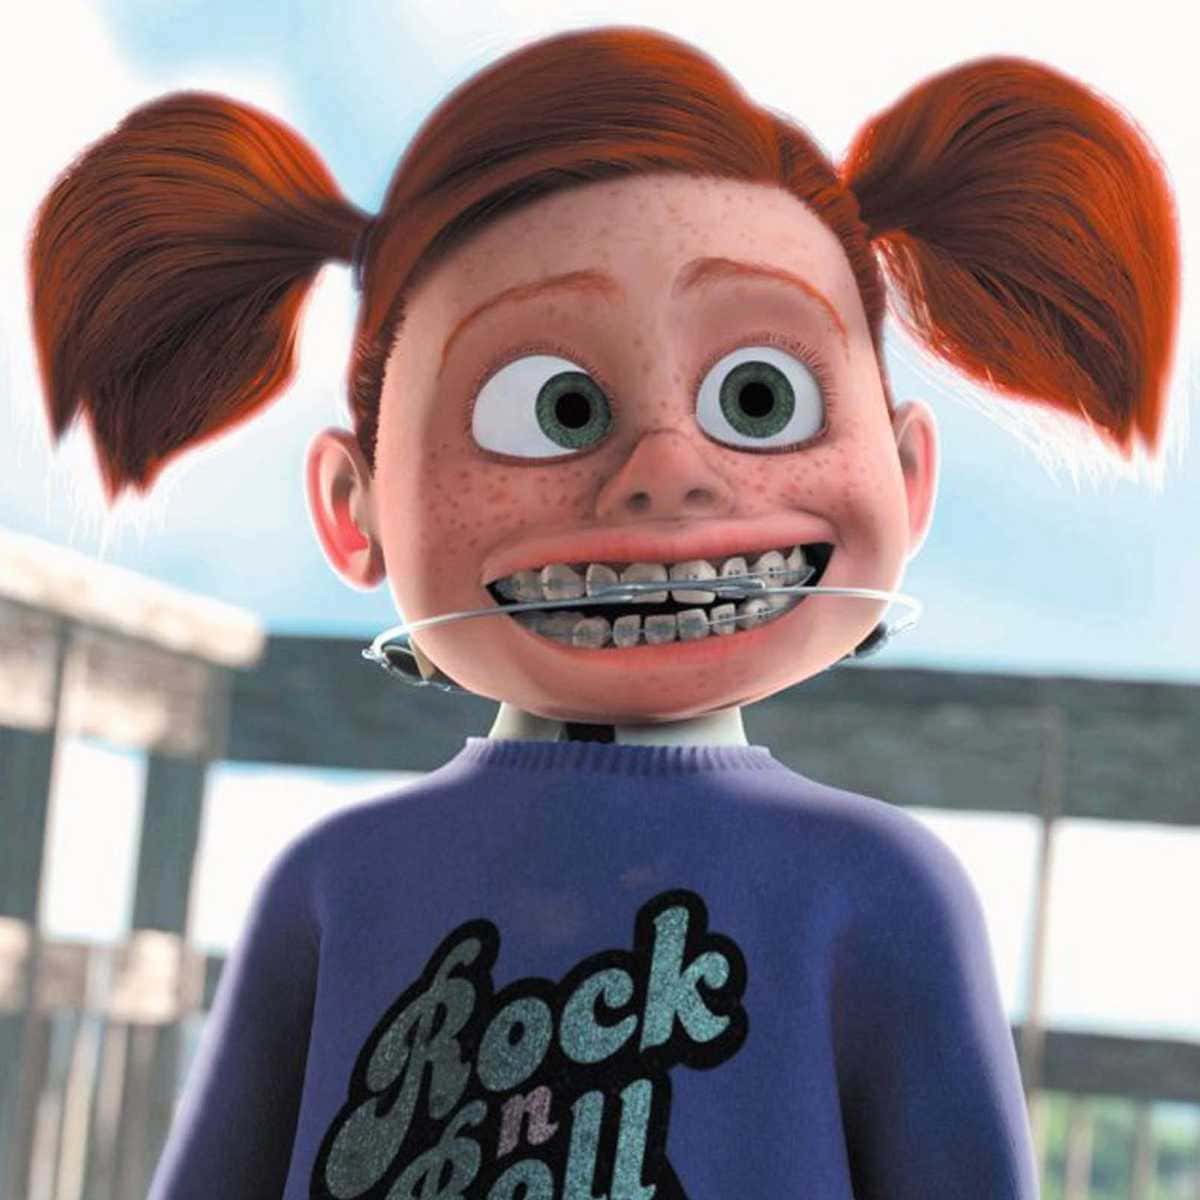 Darla Finding Nemo: The Overexcited Fish Killer with Braces